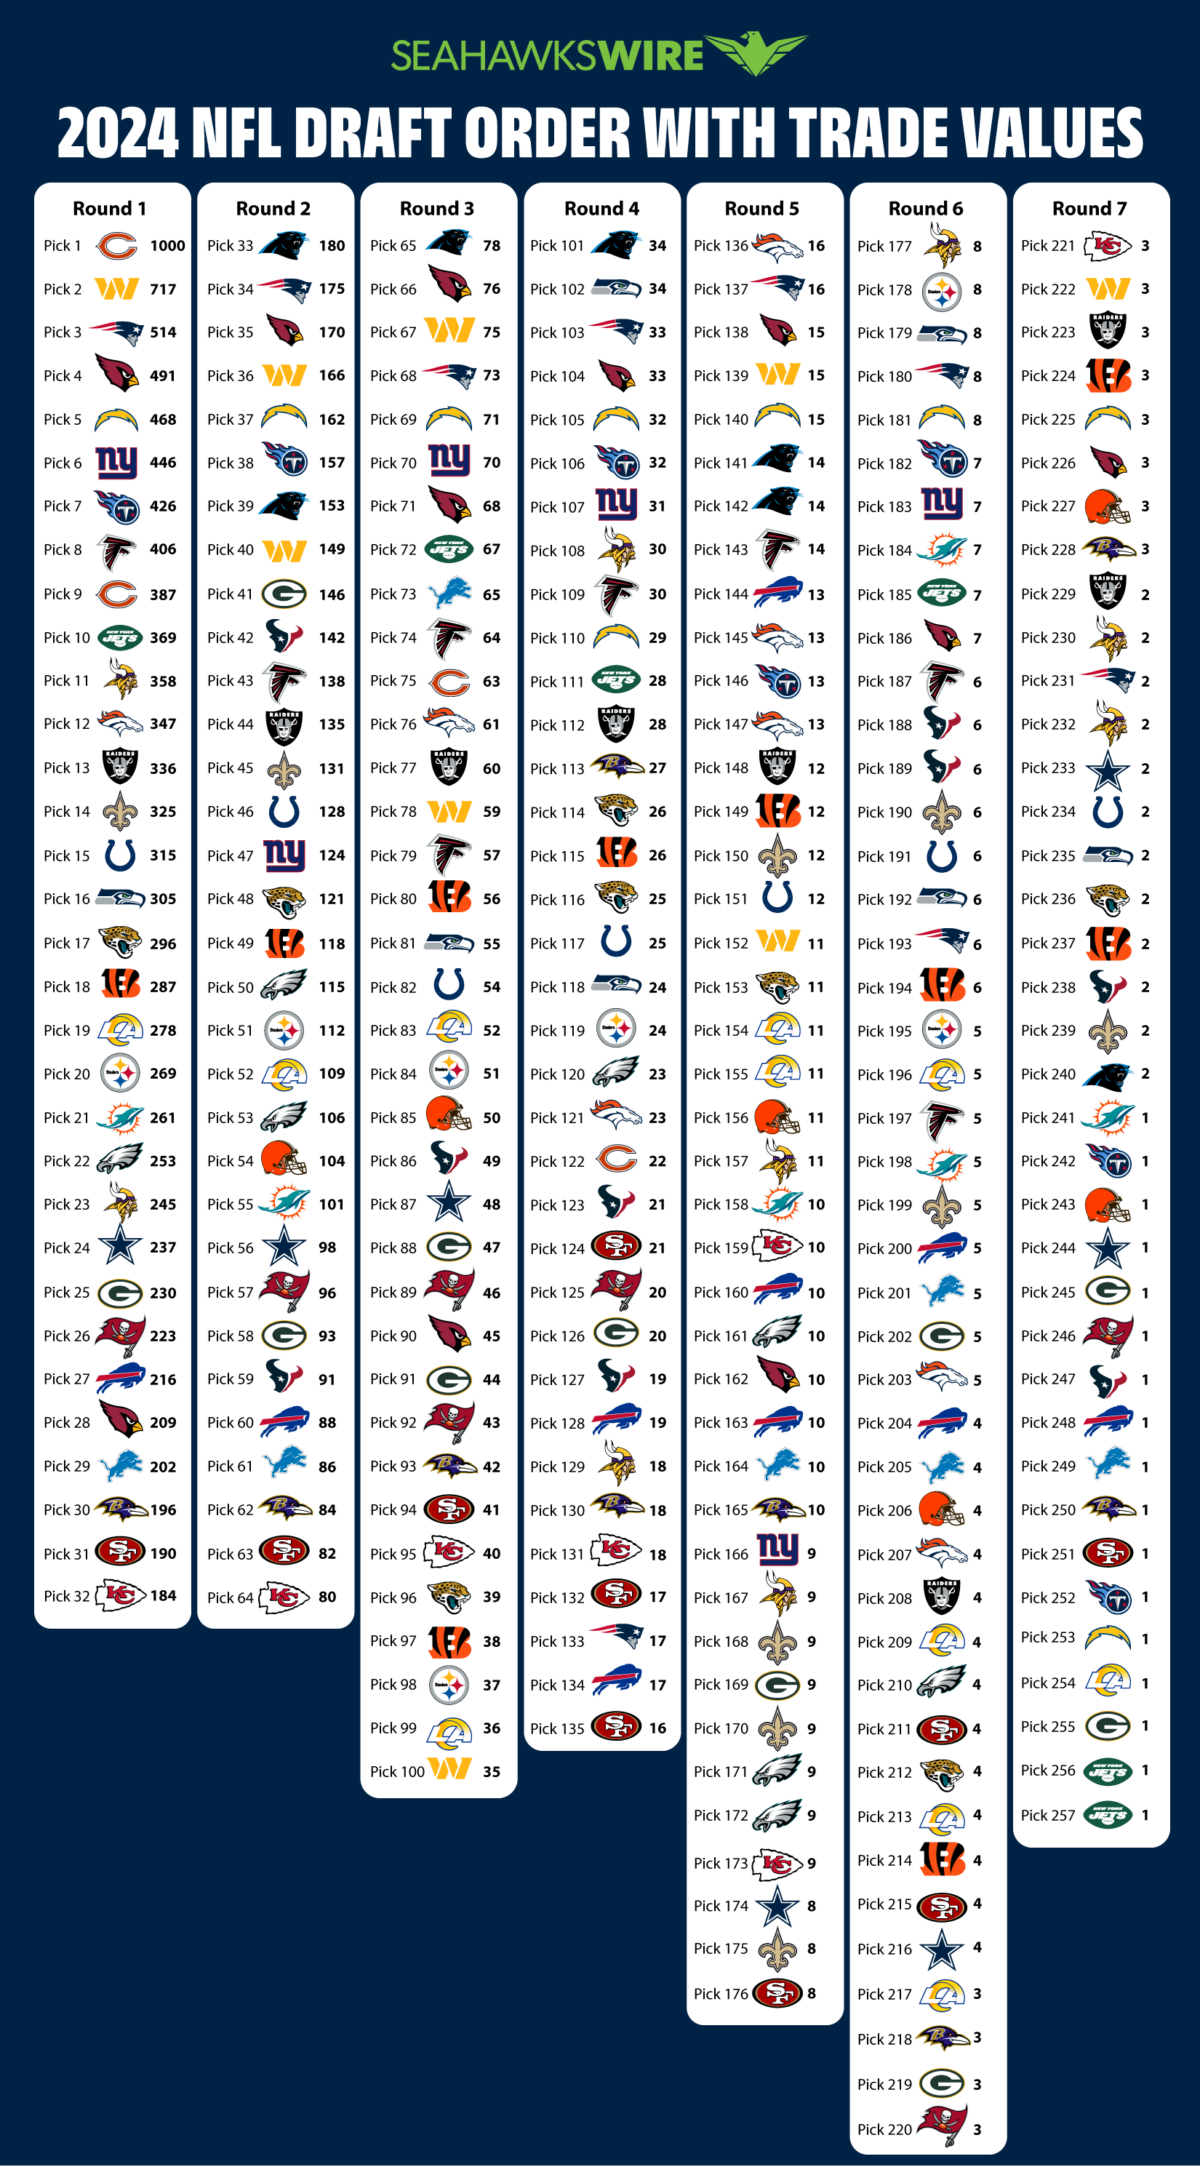 Complete 2024 NFL draft order chart with trade values